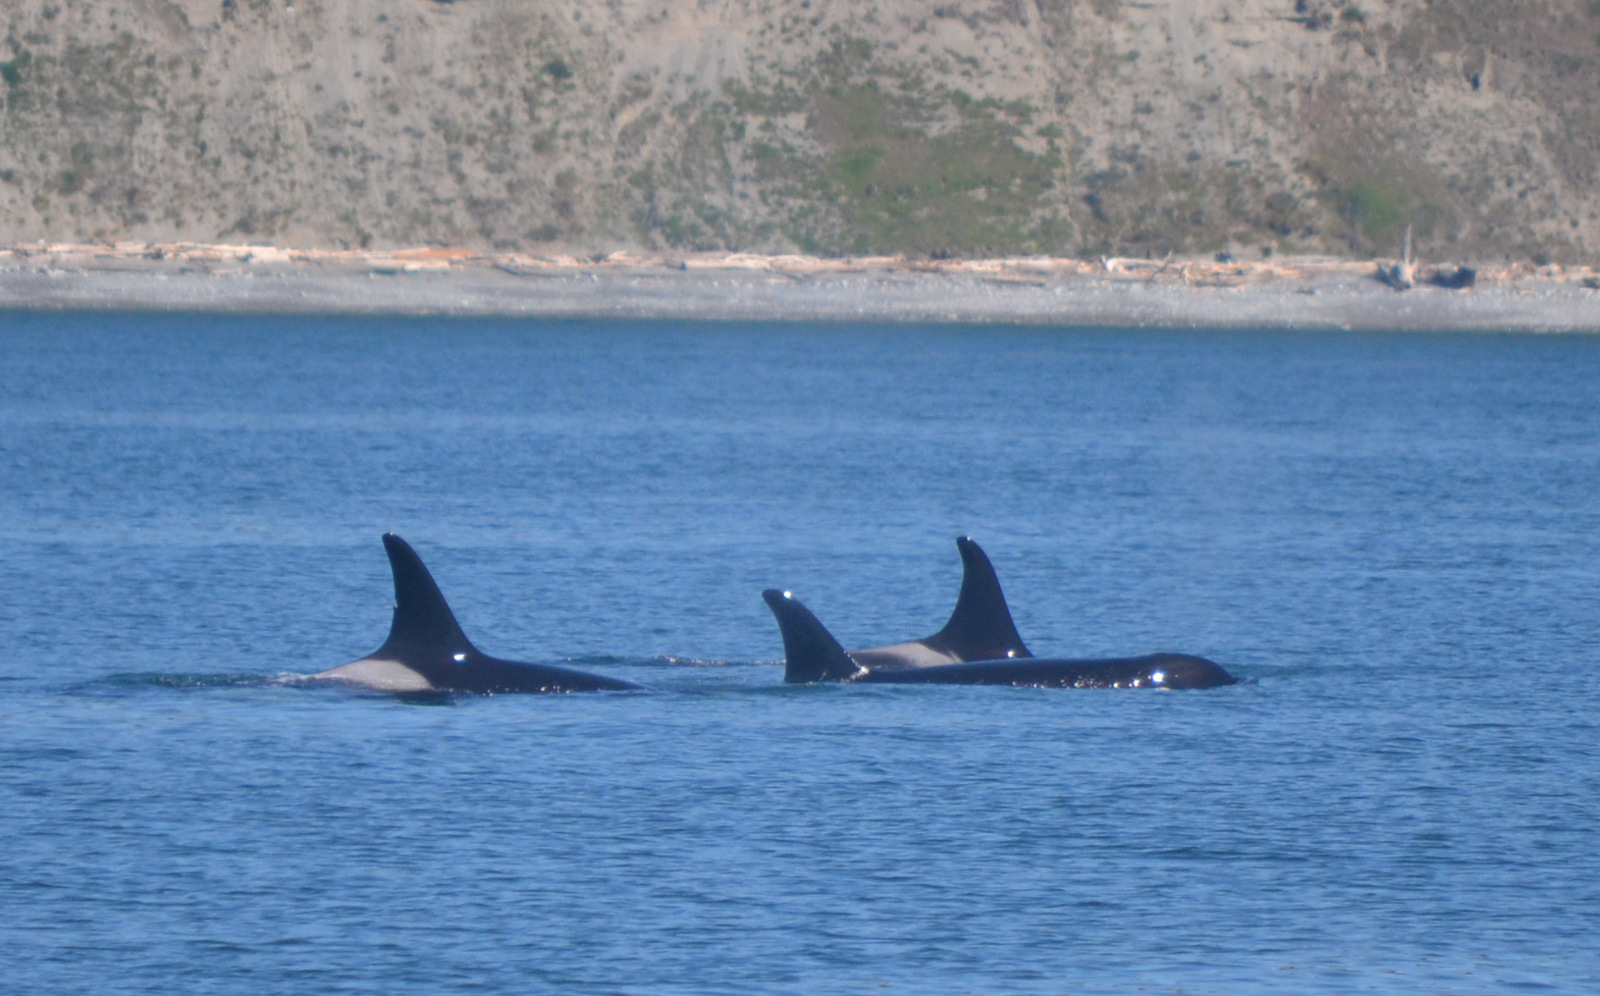 Three female killer whales at the surface